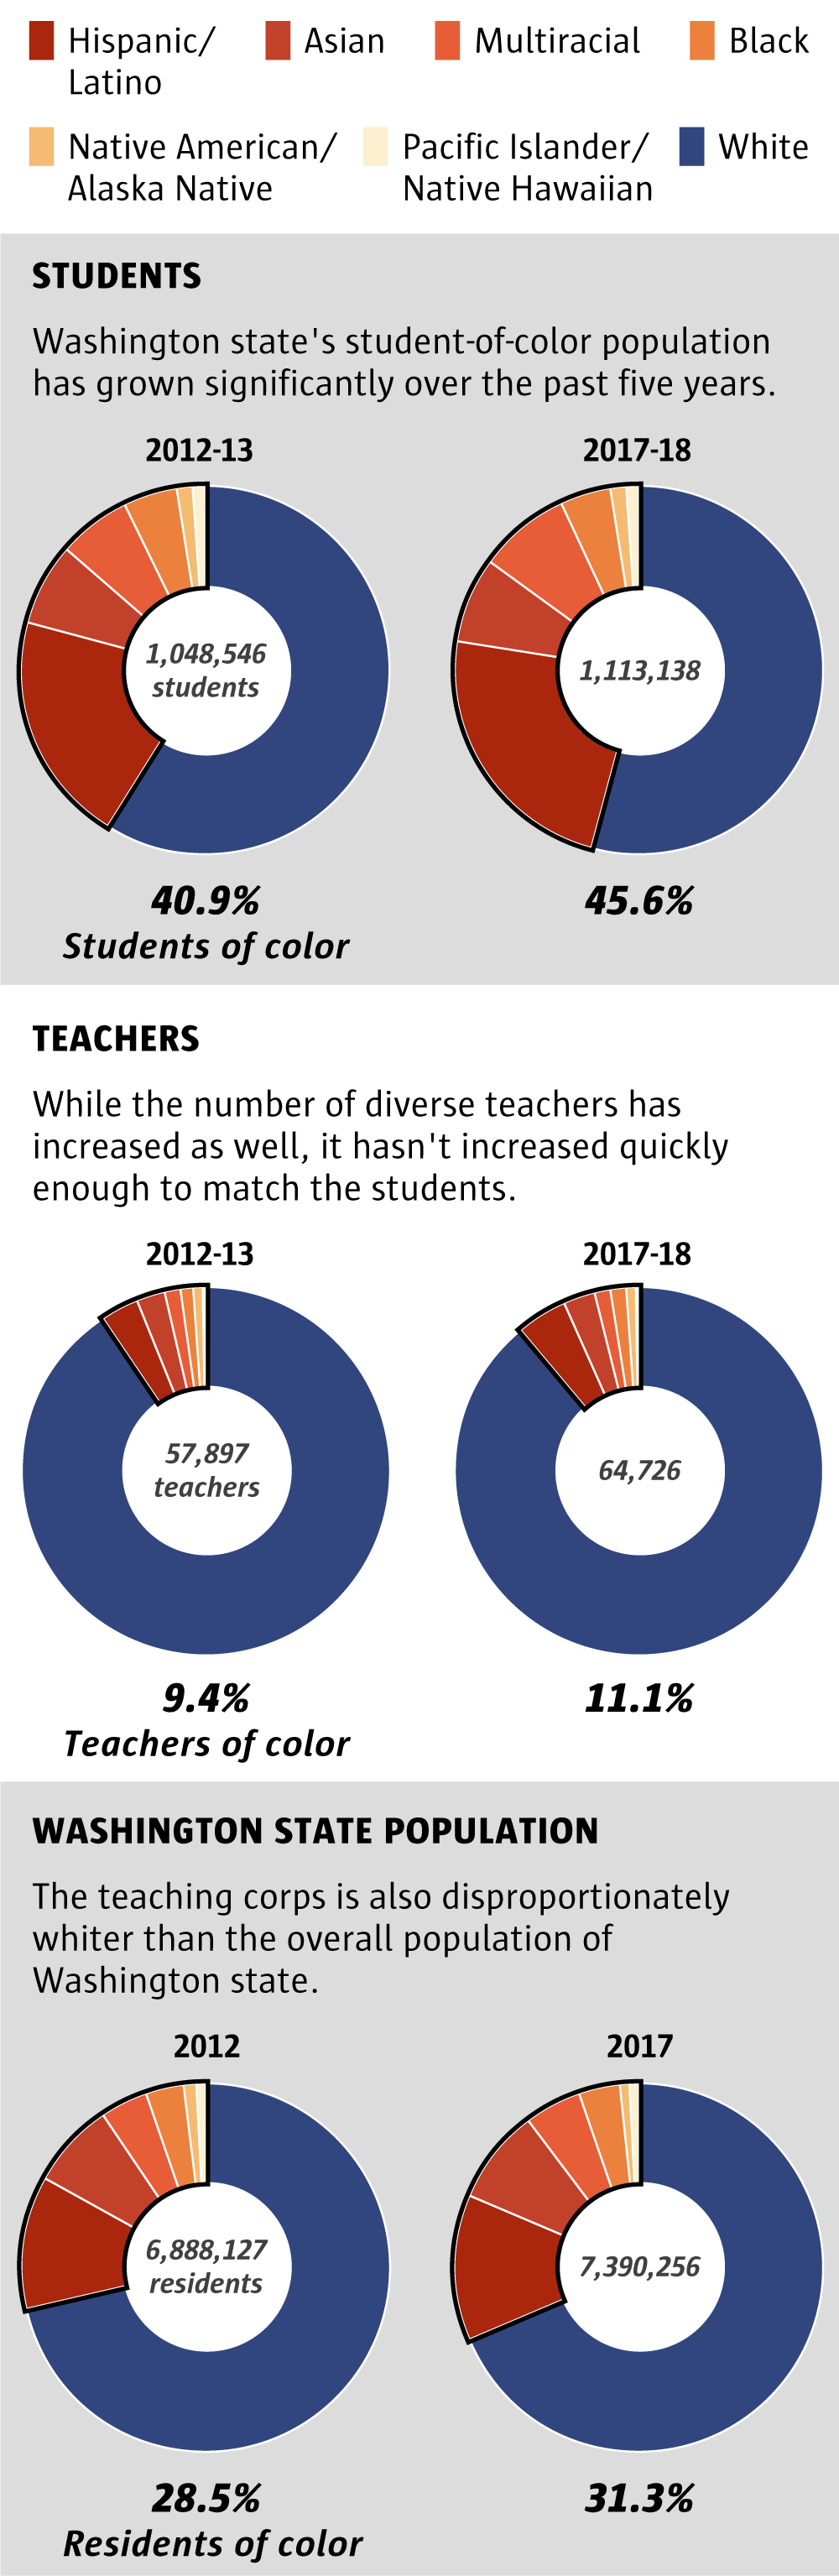 Teachers of color still a rarity in a diversifying state